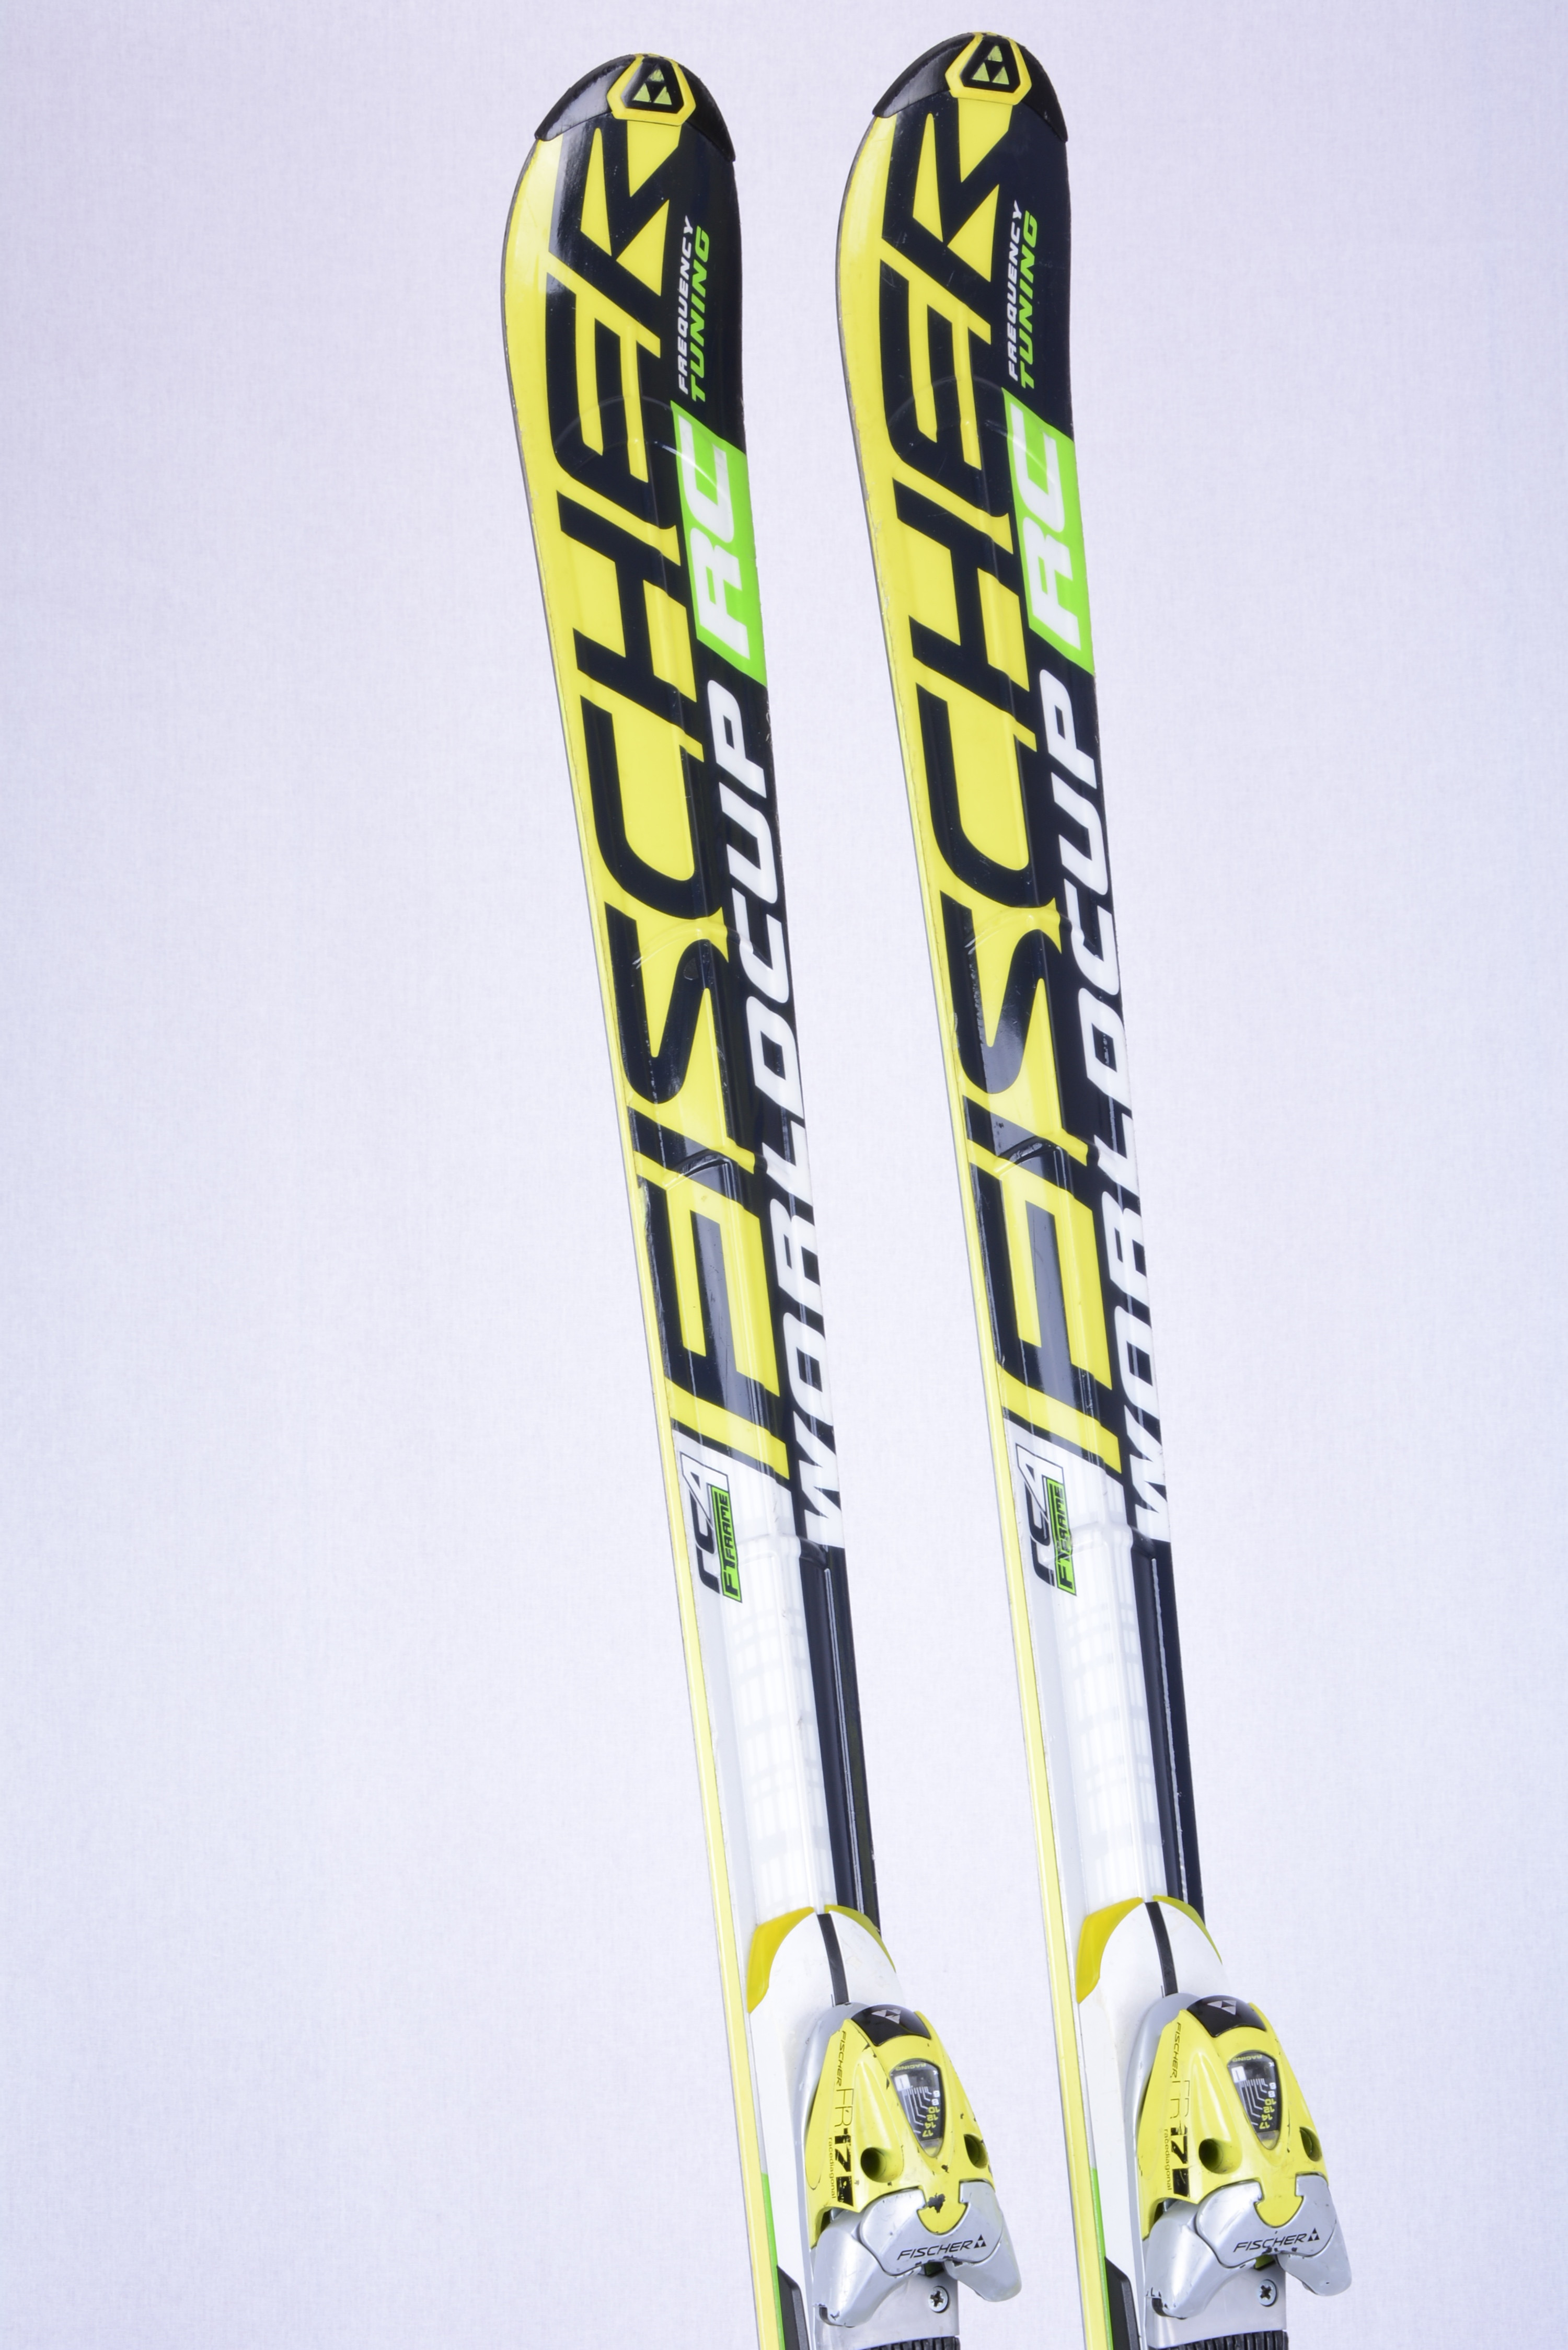 skis FISCHER RC4 WORLDCUP 17 + aircarbon TUNING, RC FREQUENCY FR frame, titanium Fischer ft